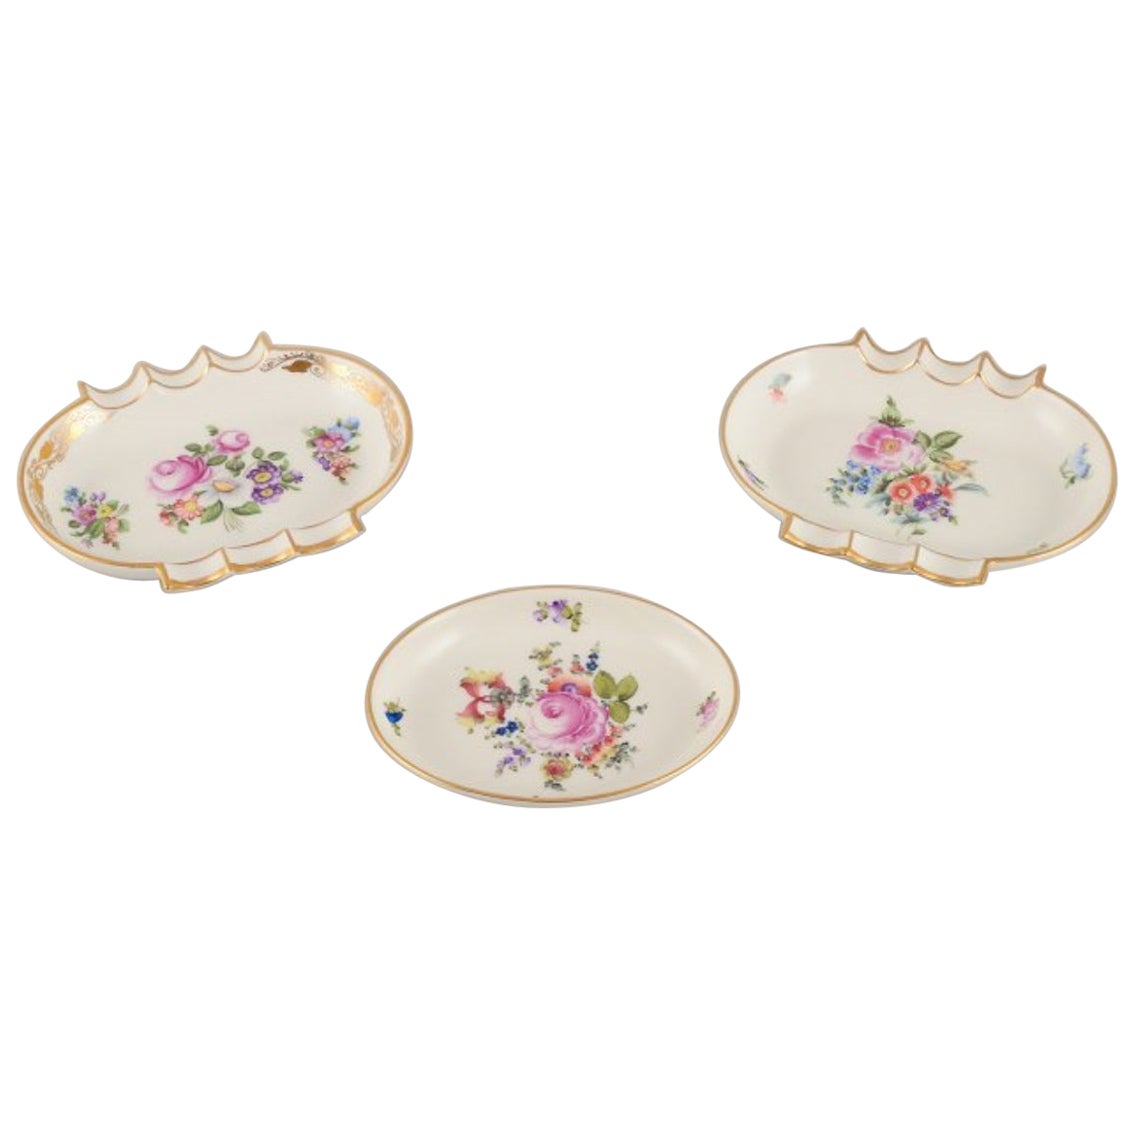 Herend, Hungary. Three small oval bowls hand-painted with flower motifs.